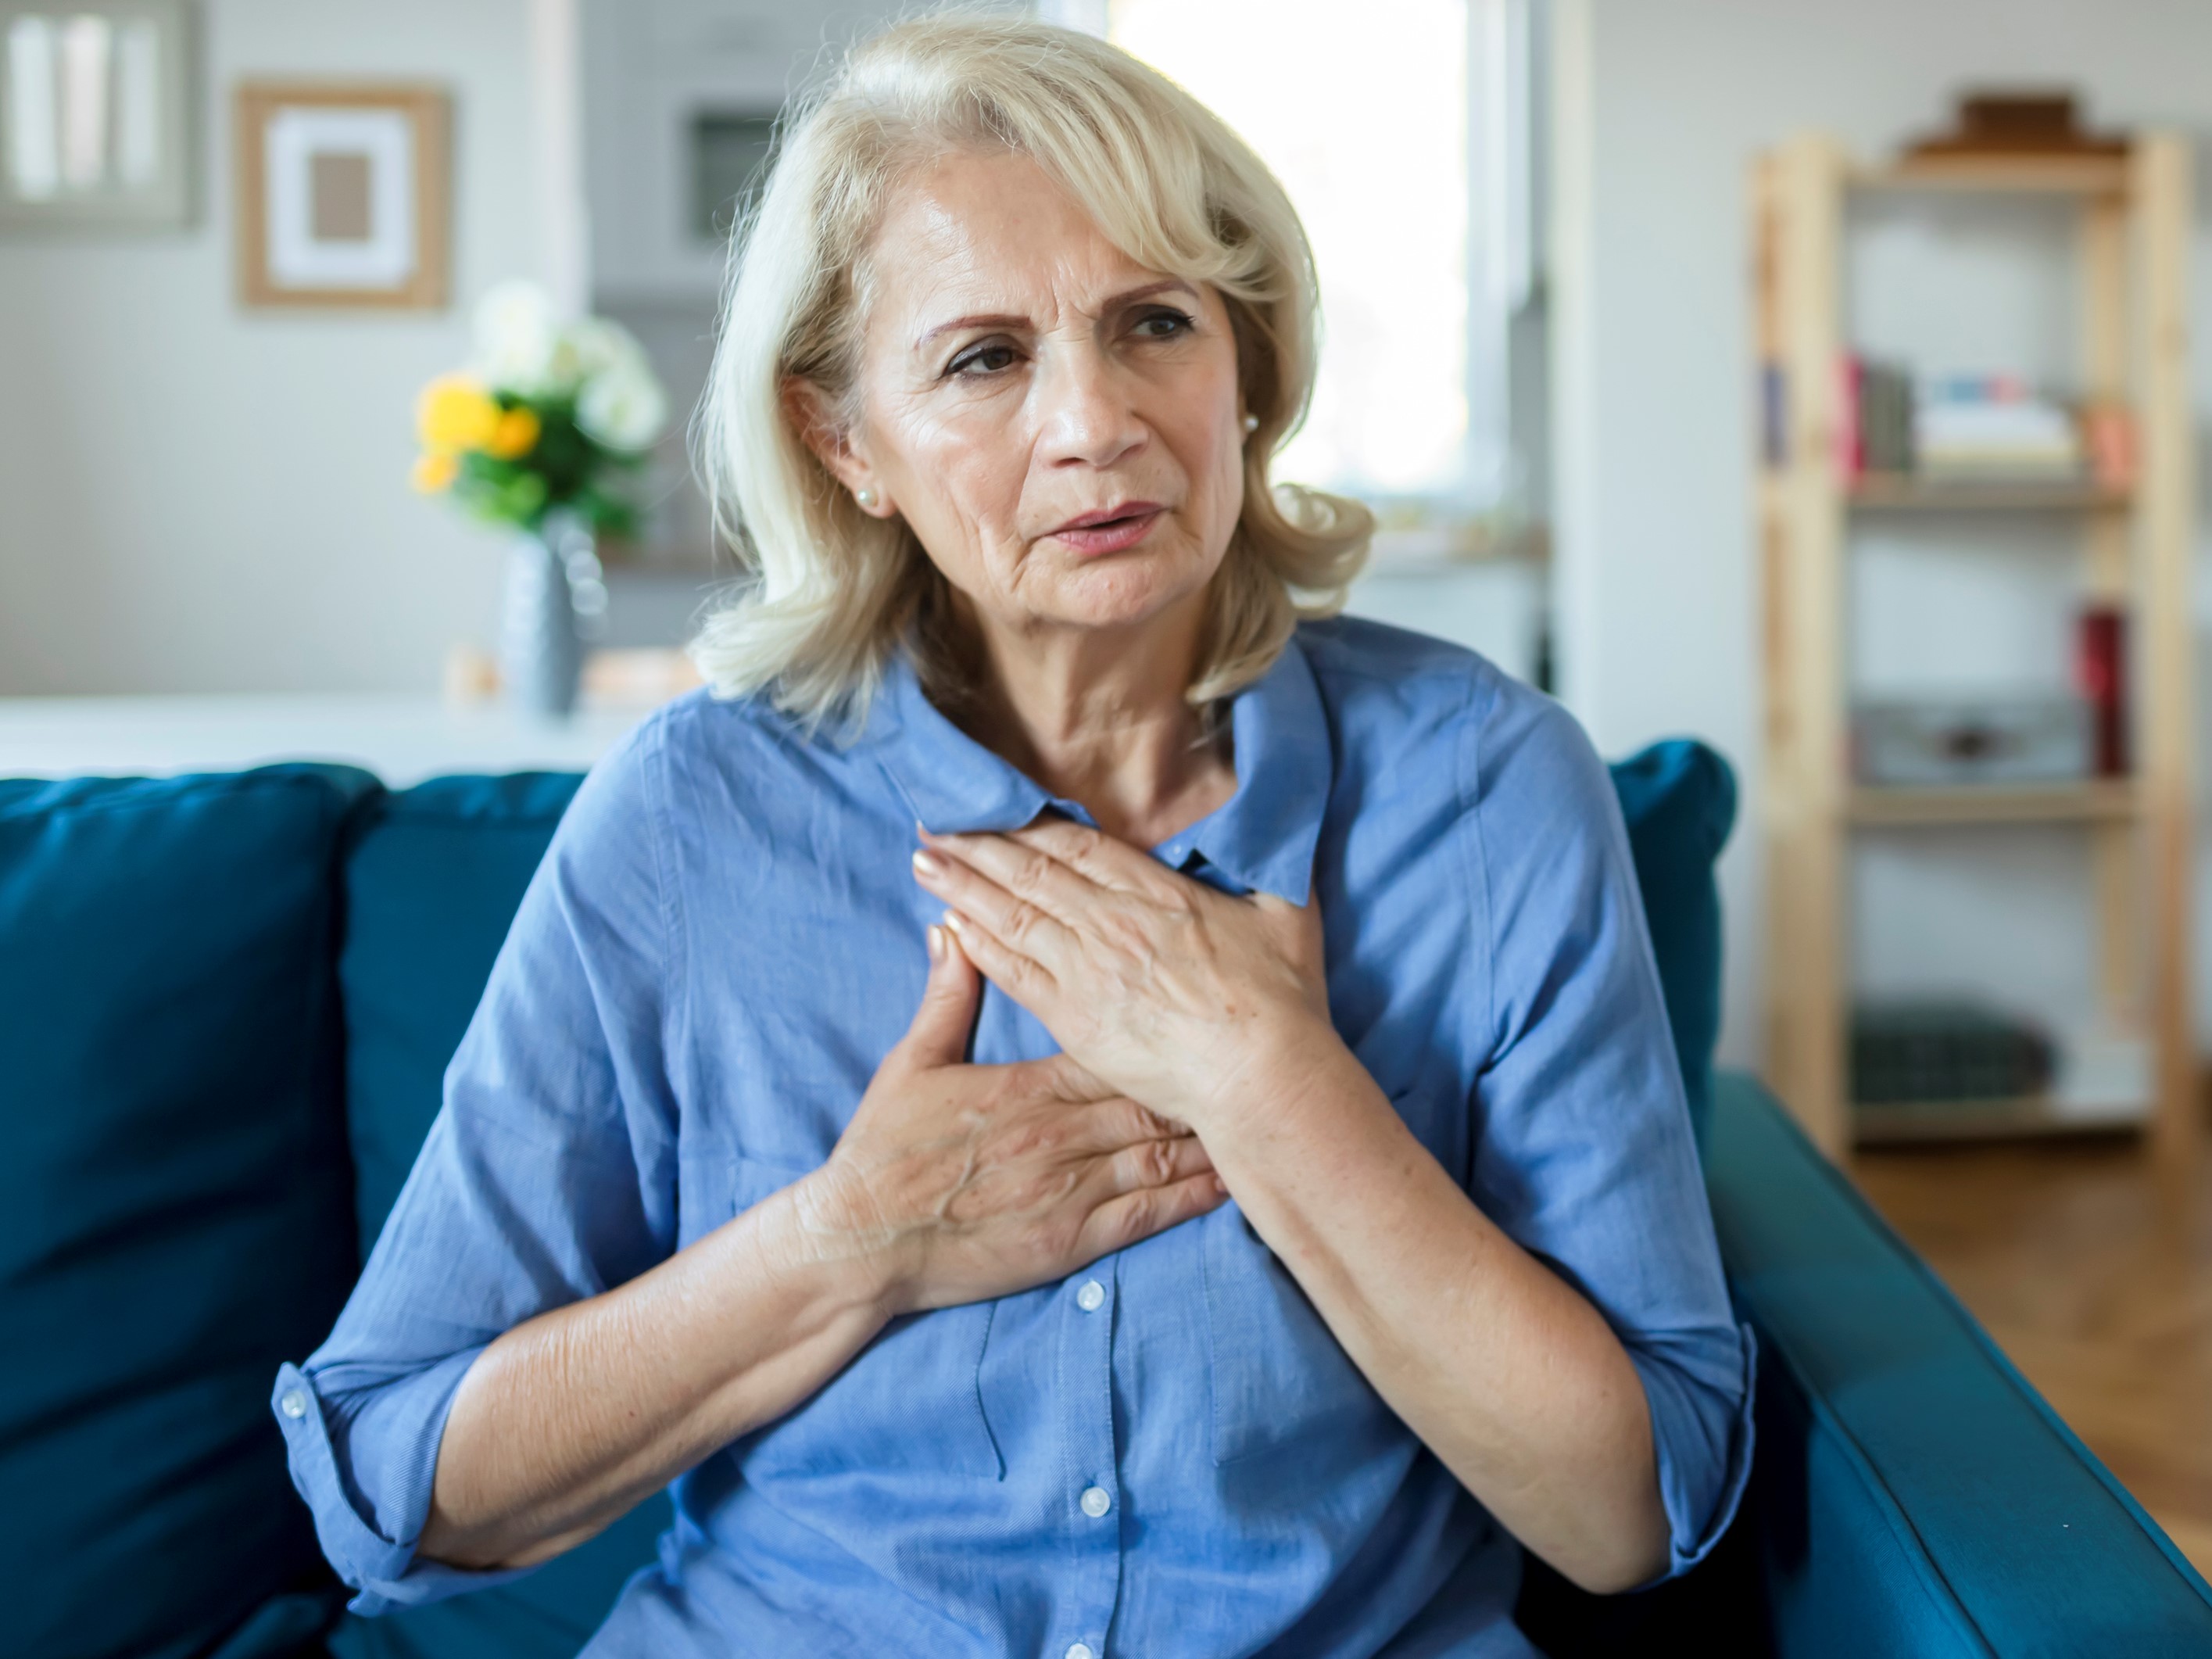 Woman looking stress with hands on chest